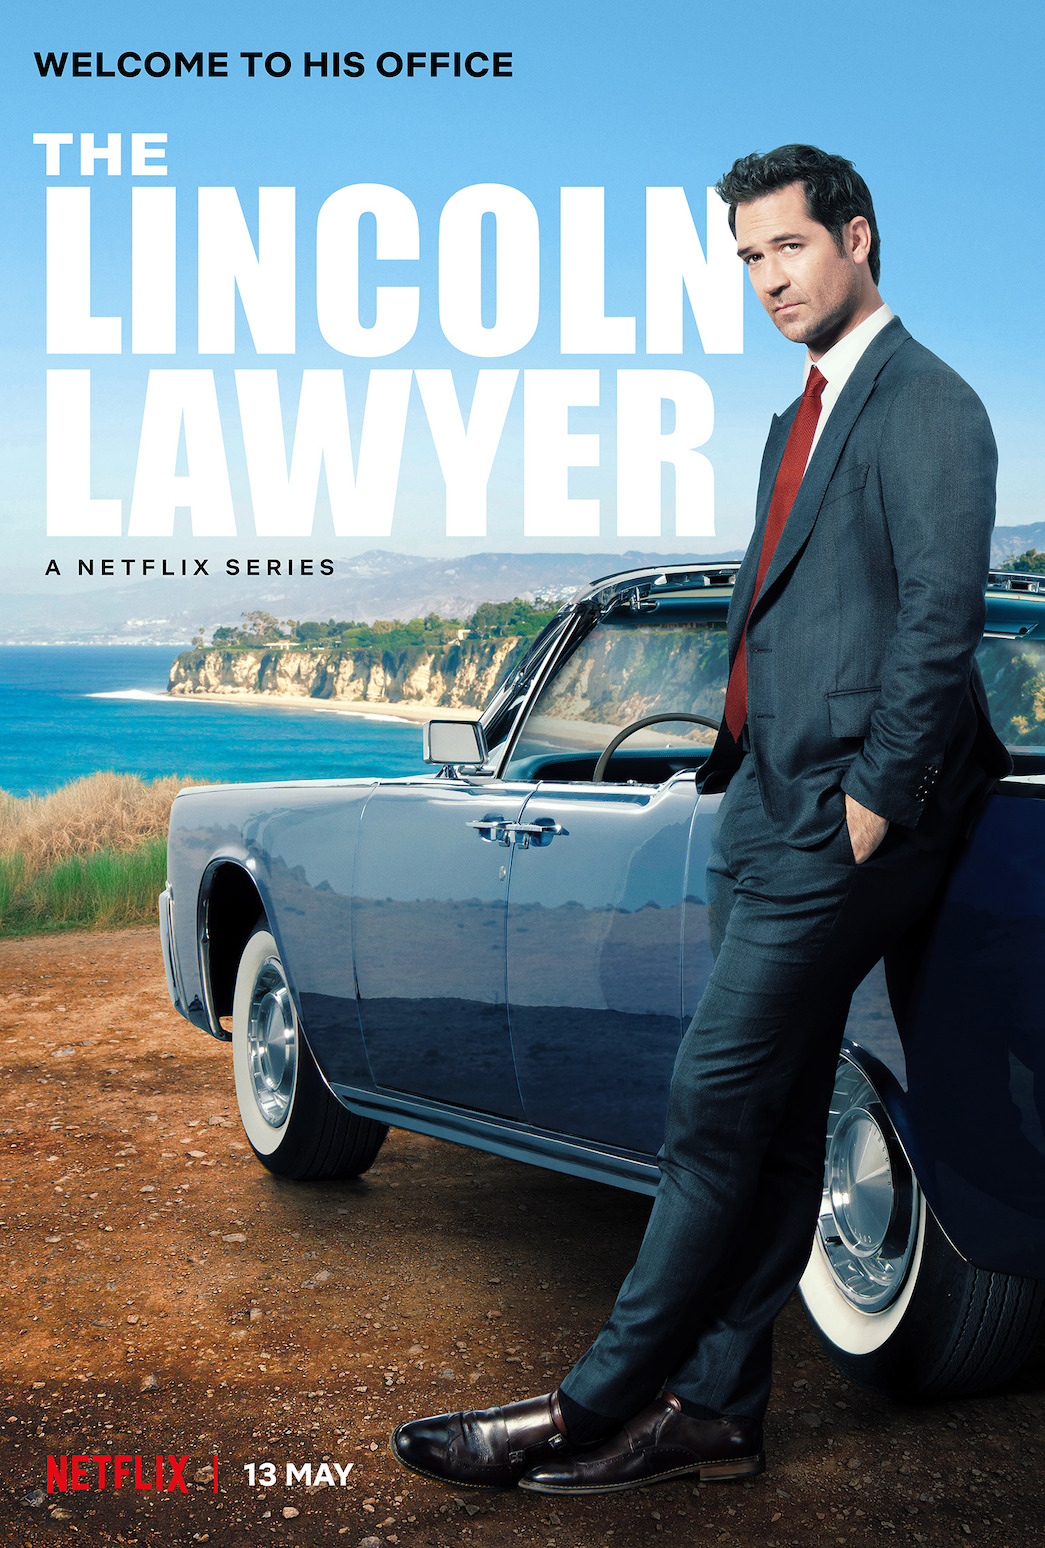 The Lincoln Lawyer Series Trailer